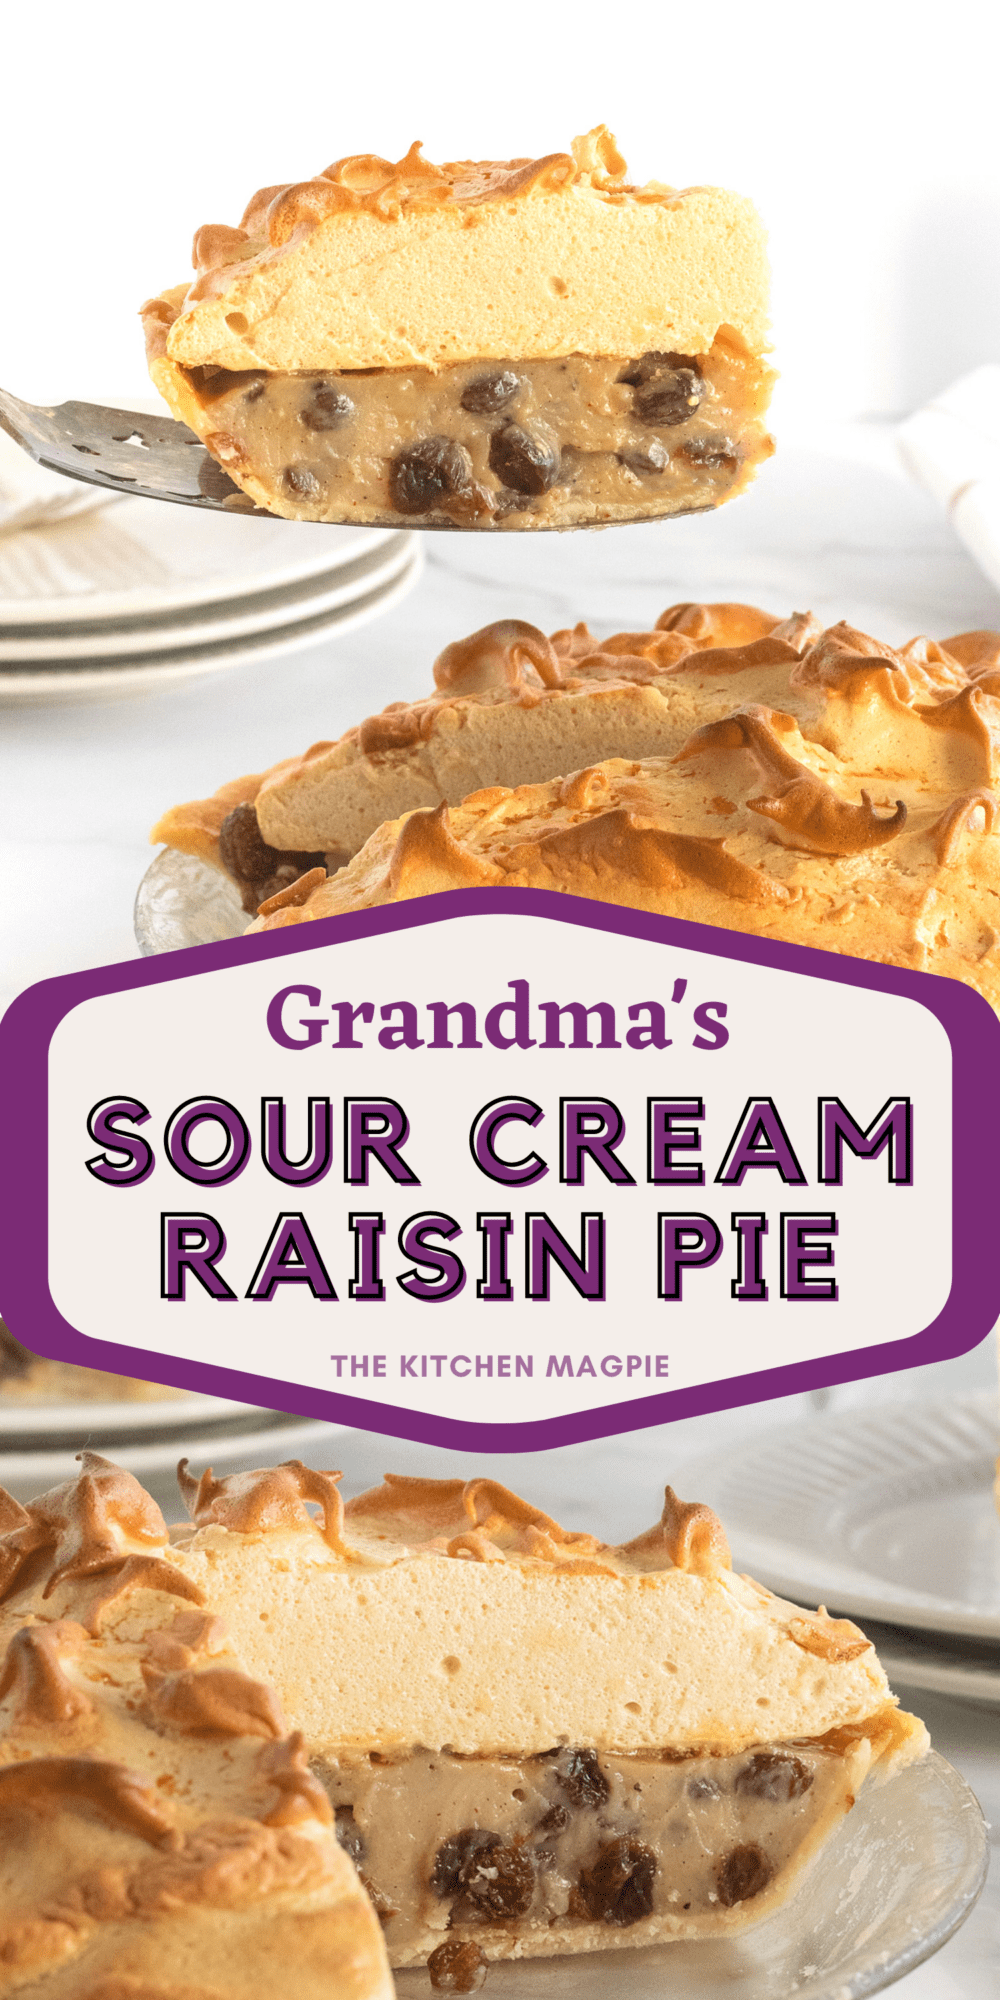 Tangy and sweet, this sour cream raisin pie is just like Grandma used to make! This custard and raisin filled pie is topped with a decadent meringue topping for pie perfection!  